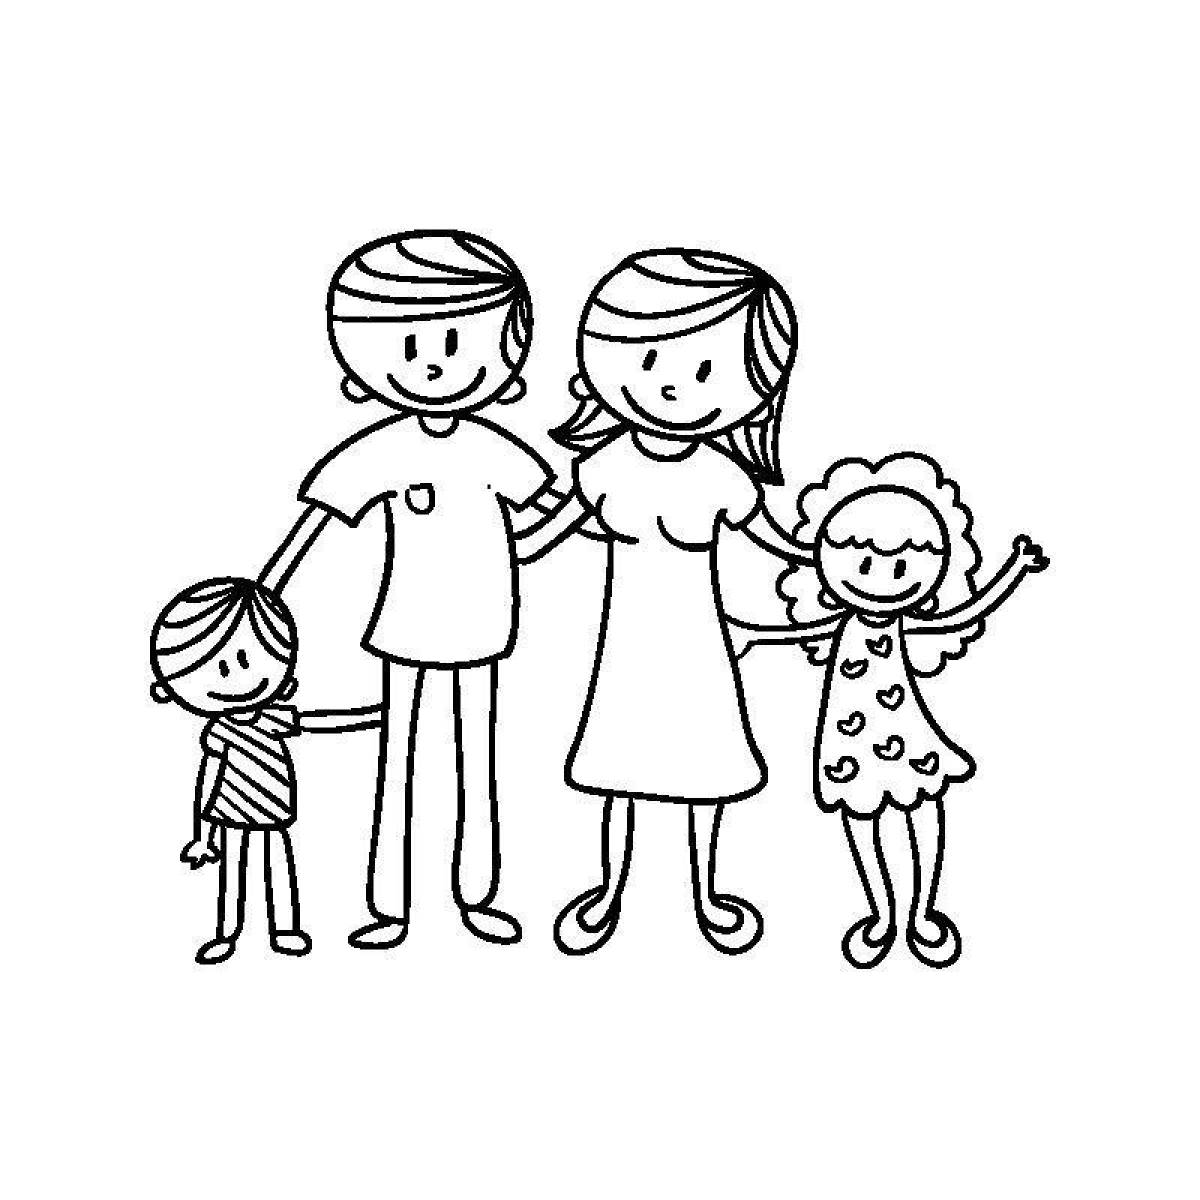 Coloring page exalted family of 4